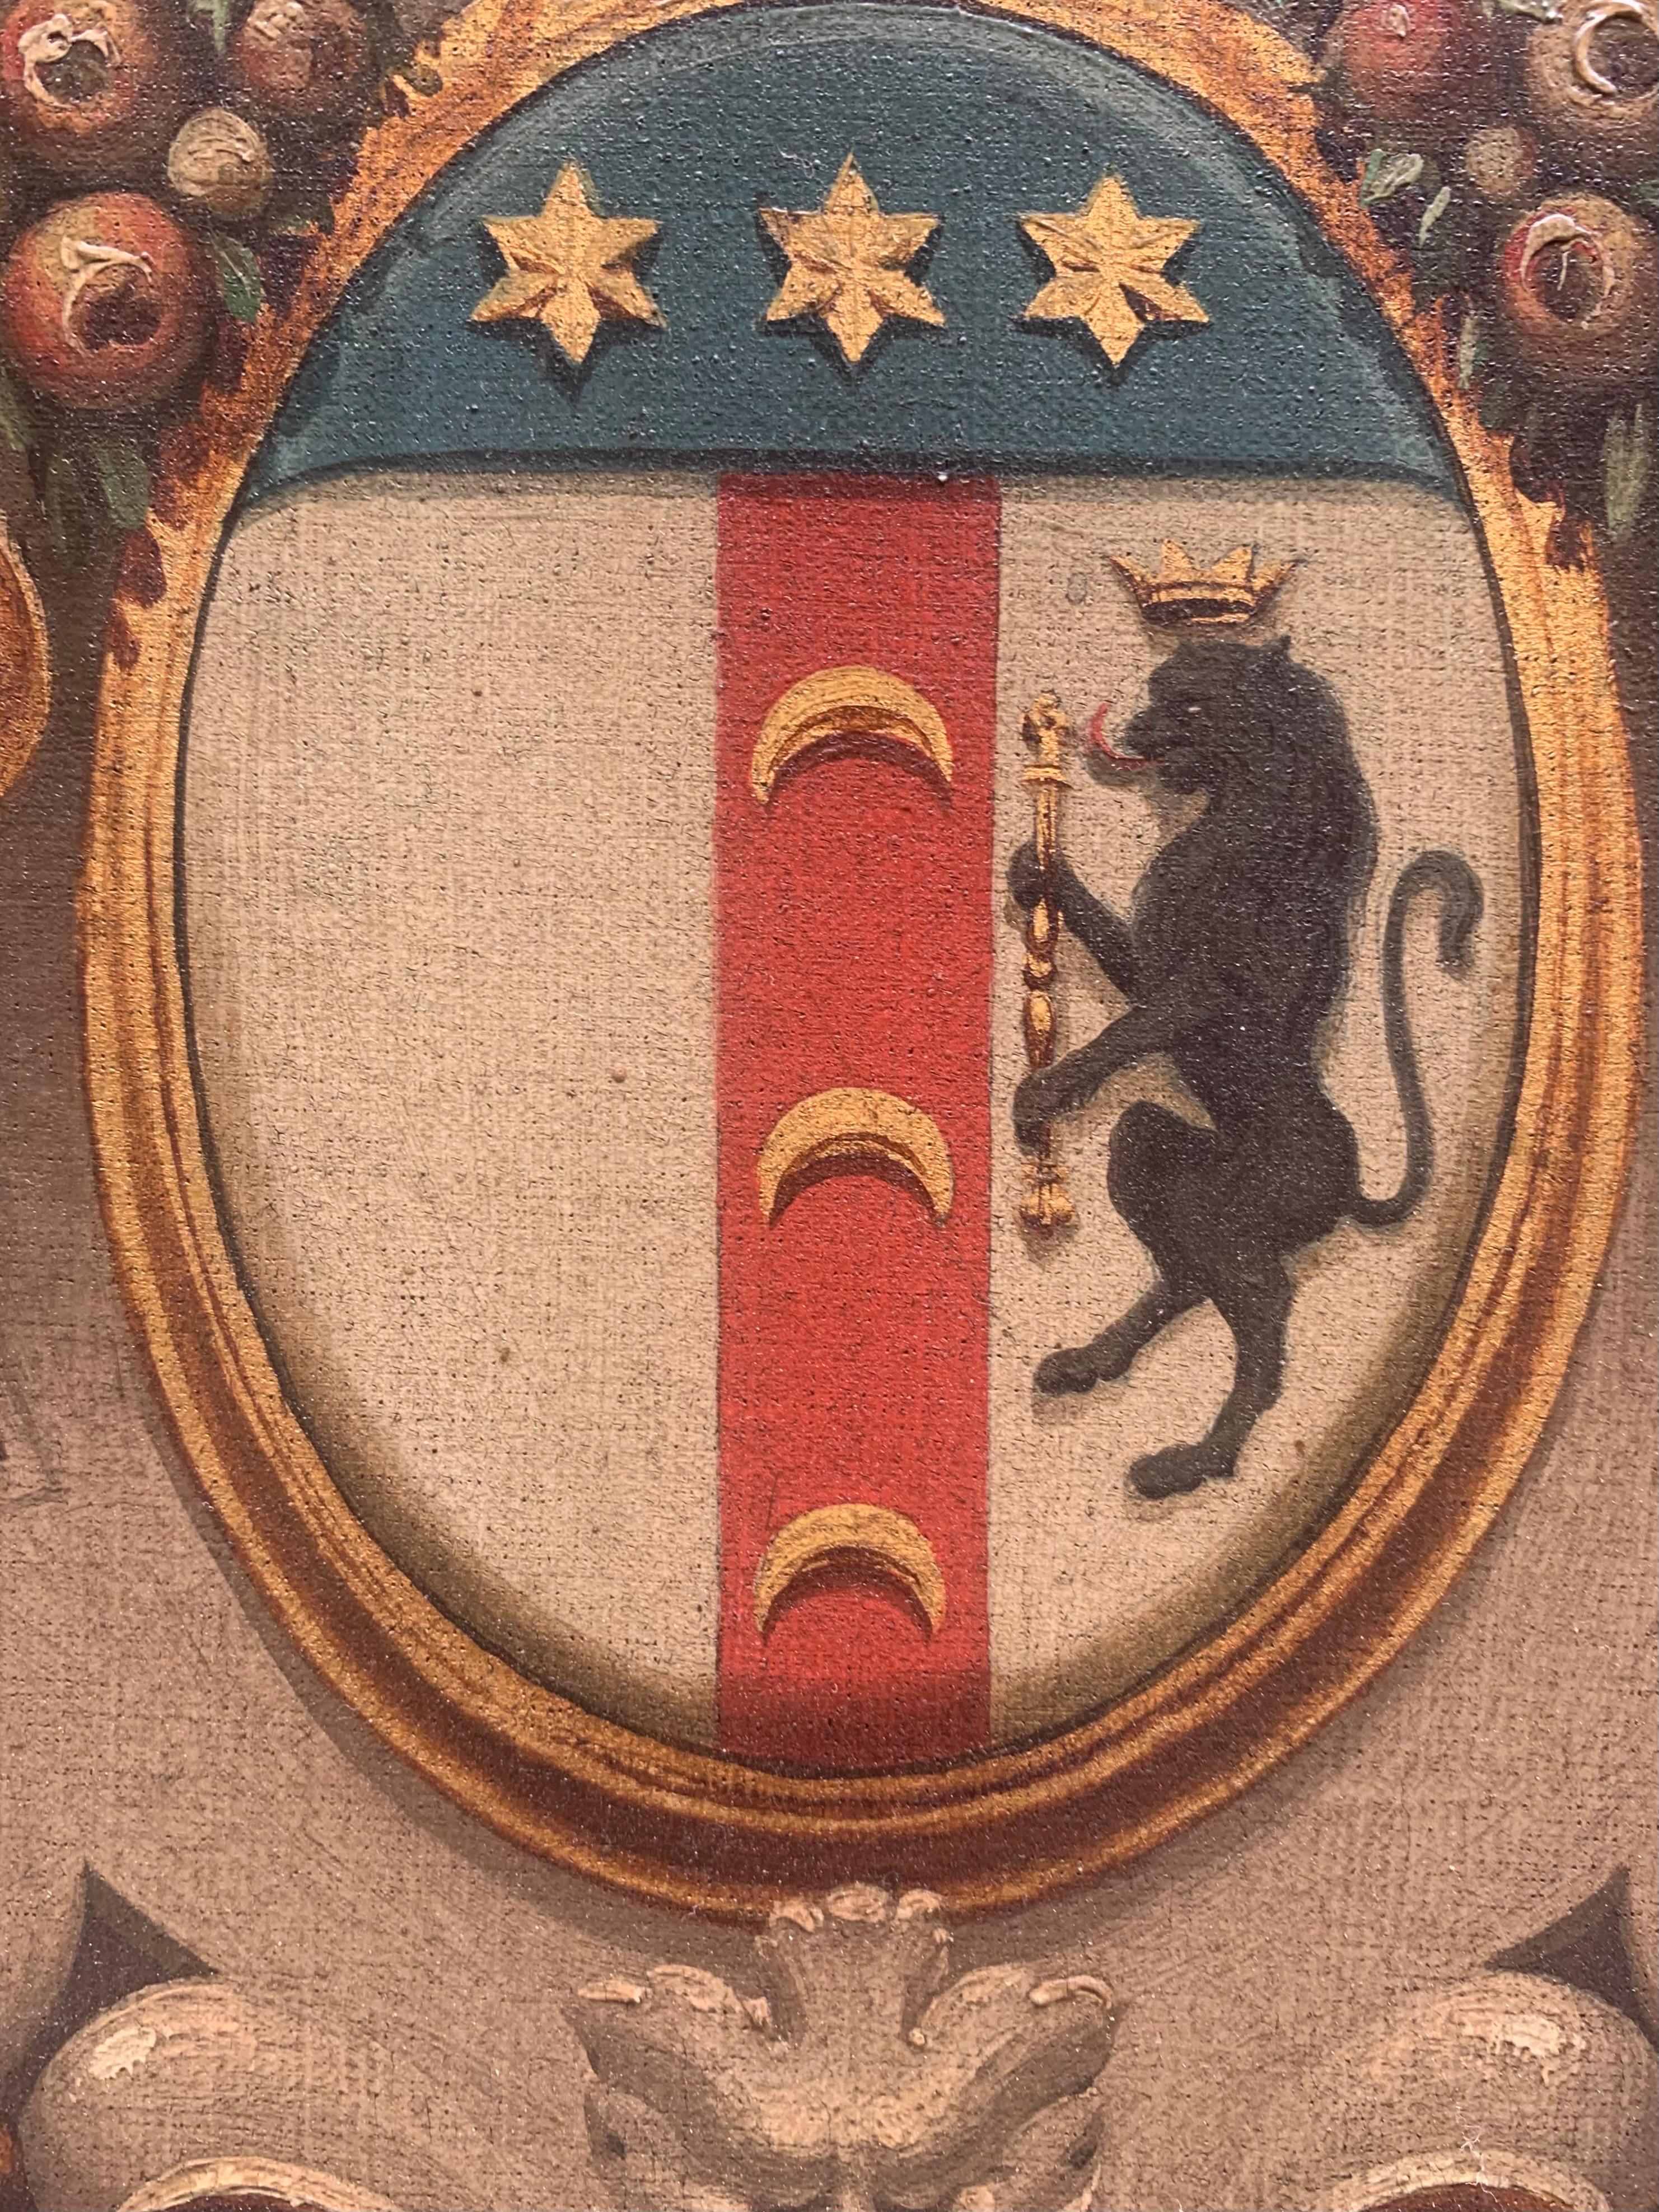 Painted  Coat Of Arms With The Neri Family. Year 1891. - Art Nouveau Painting by Unknown